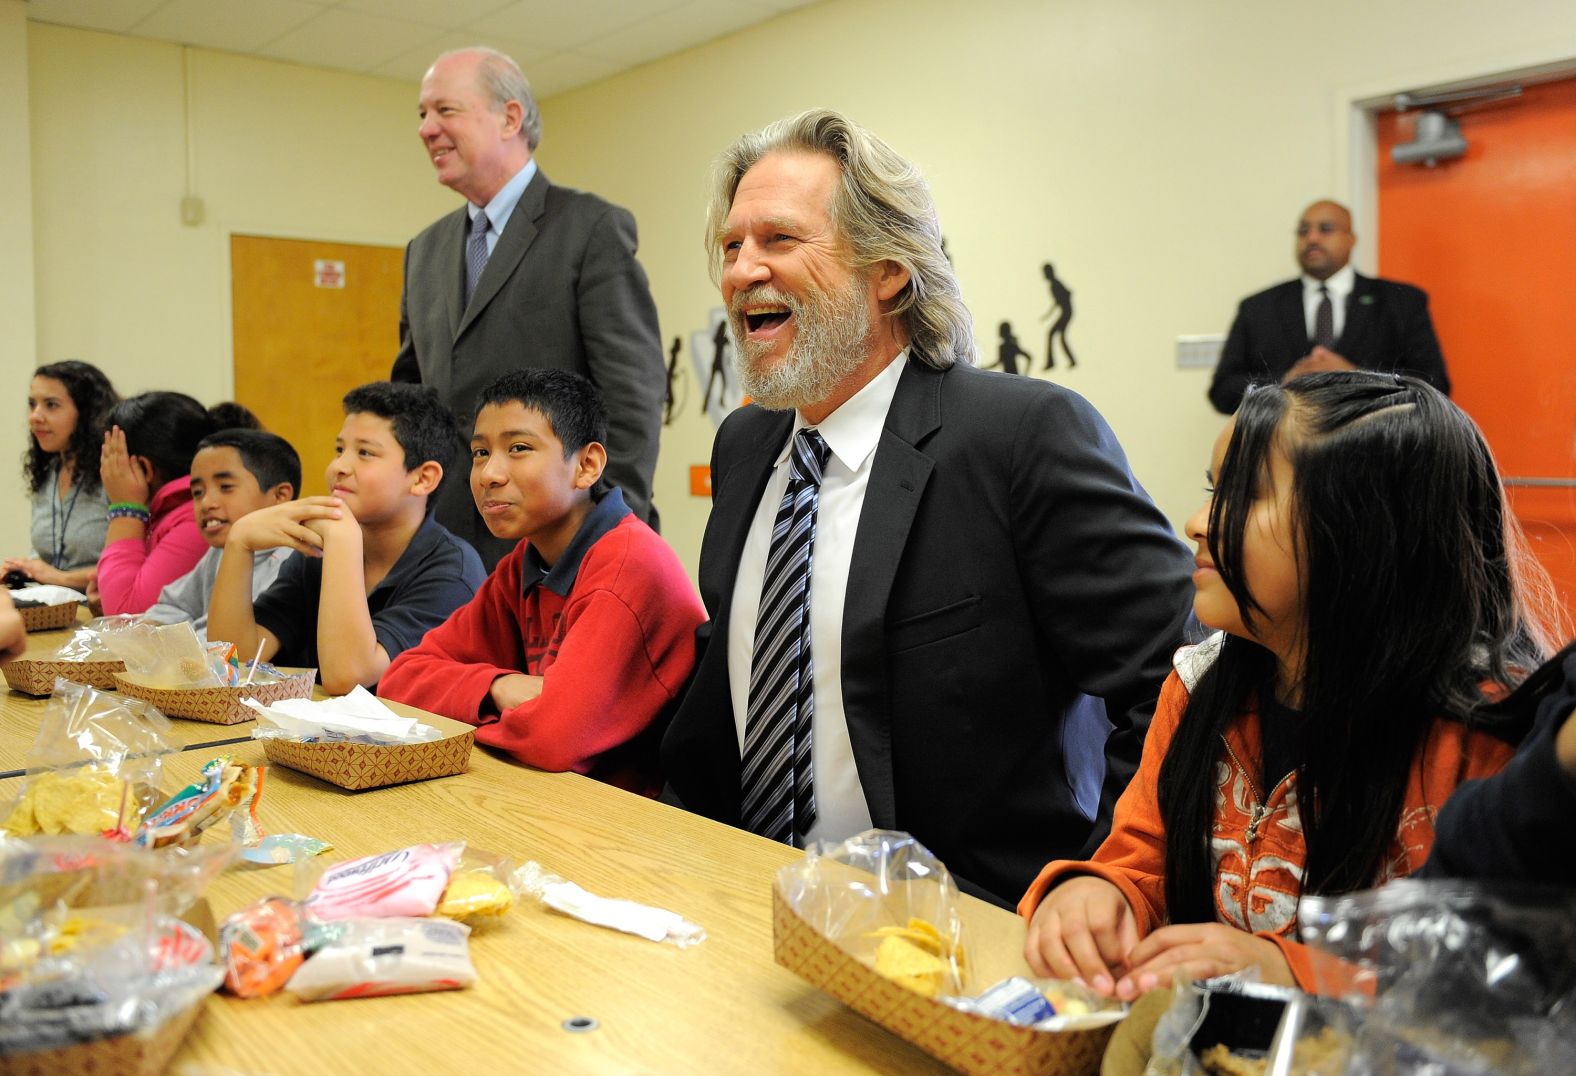 Bridges poses with elementary school students in Los Angeles at the launch of the "No Kid Hungry" campaign in 2011. In 1983, Bridges founded the End Hunger Network, a nonprofit organization dedicated to feeding children around the world.